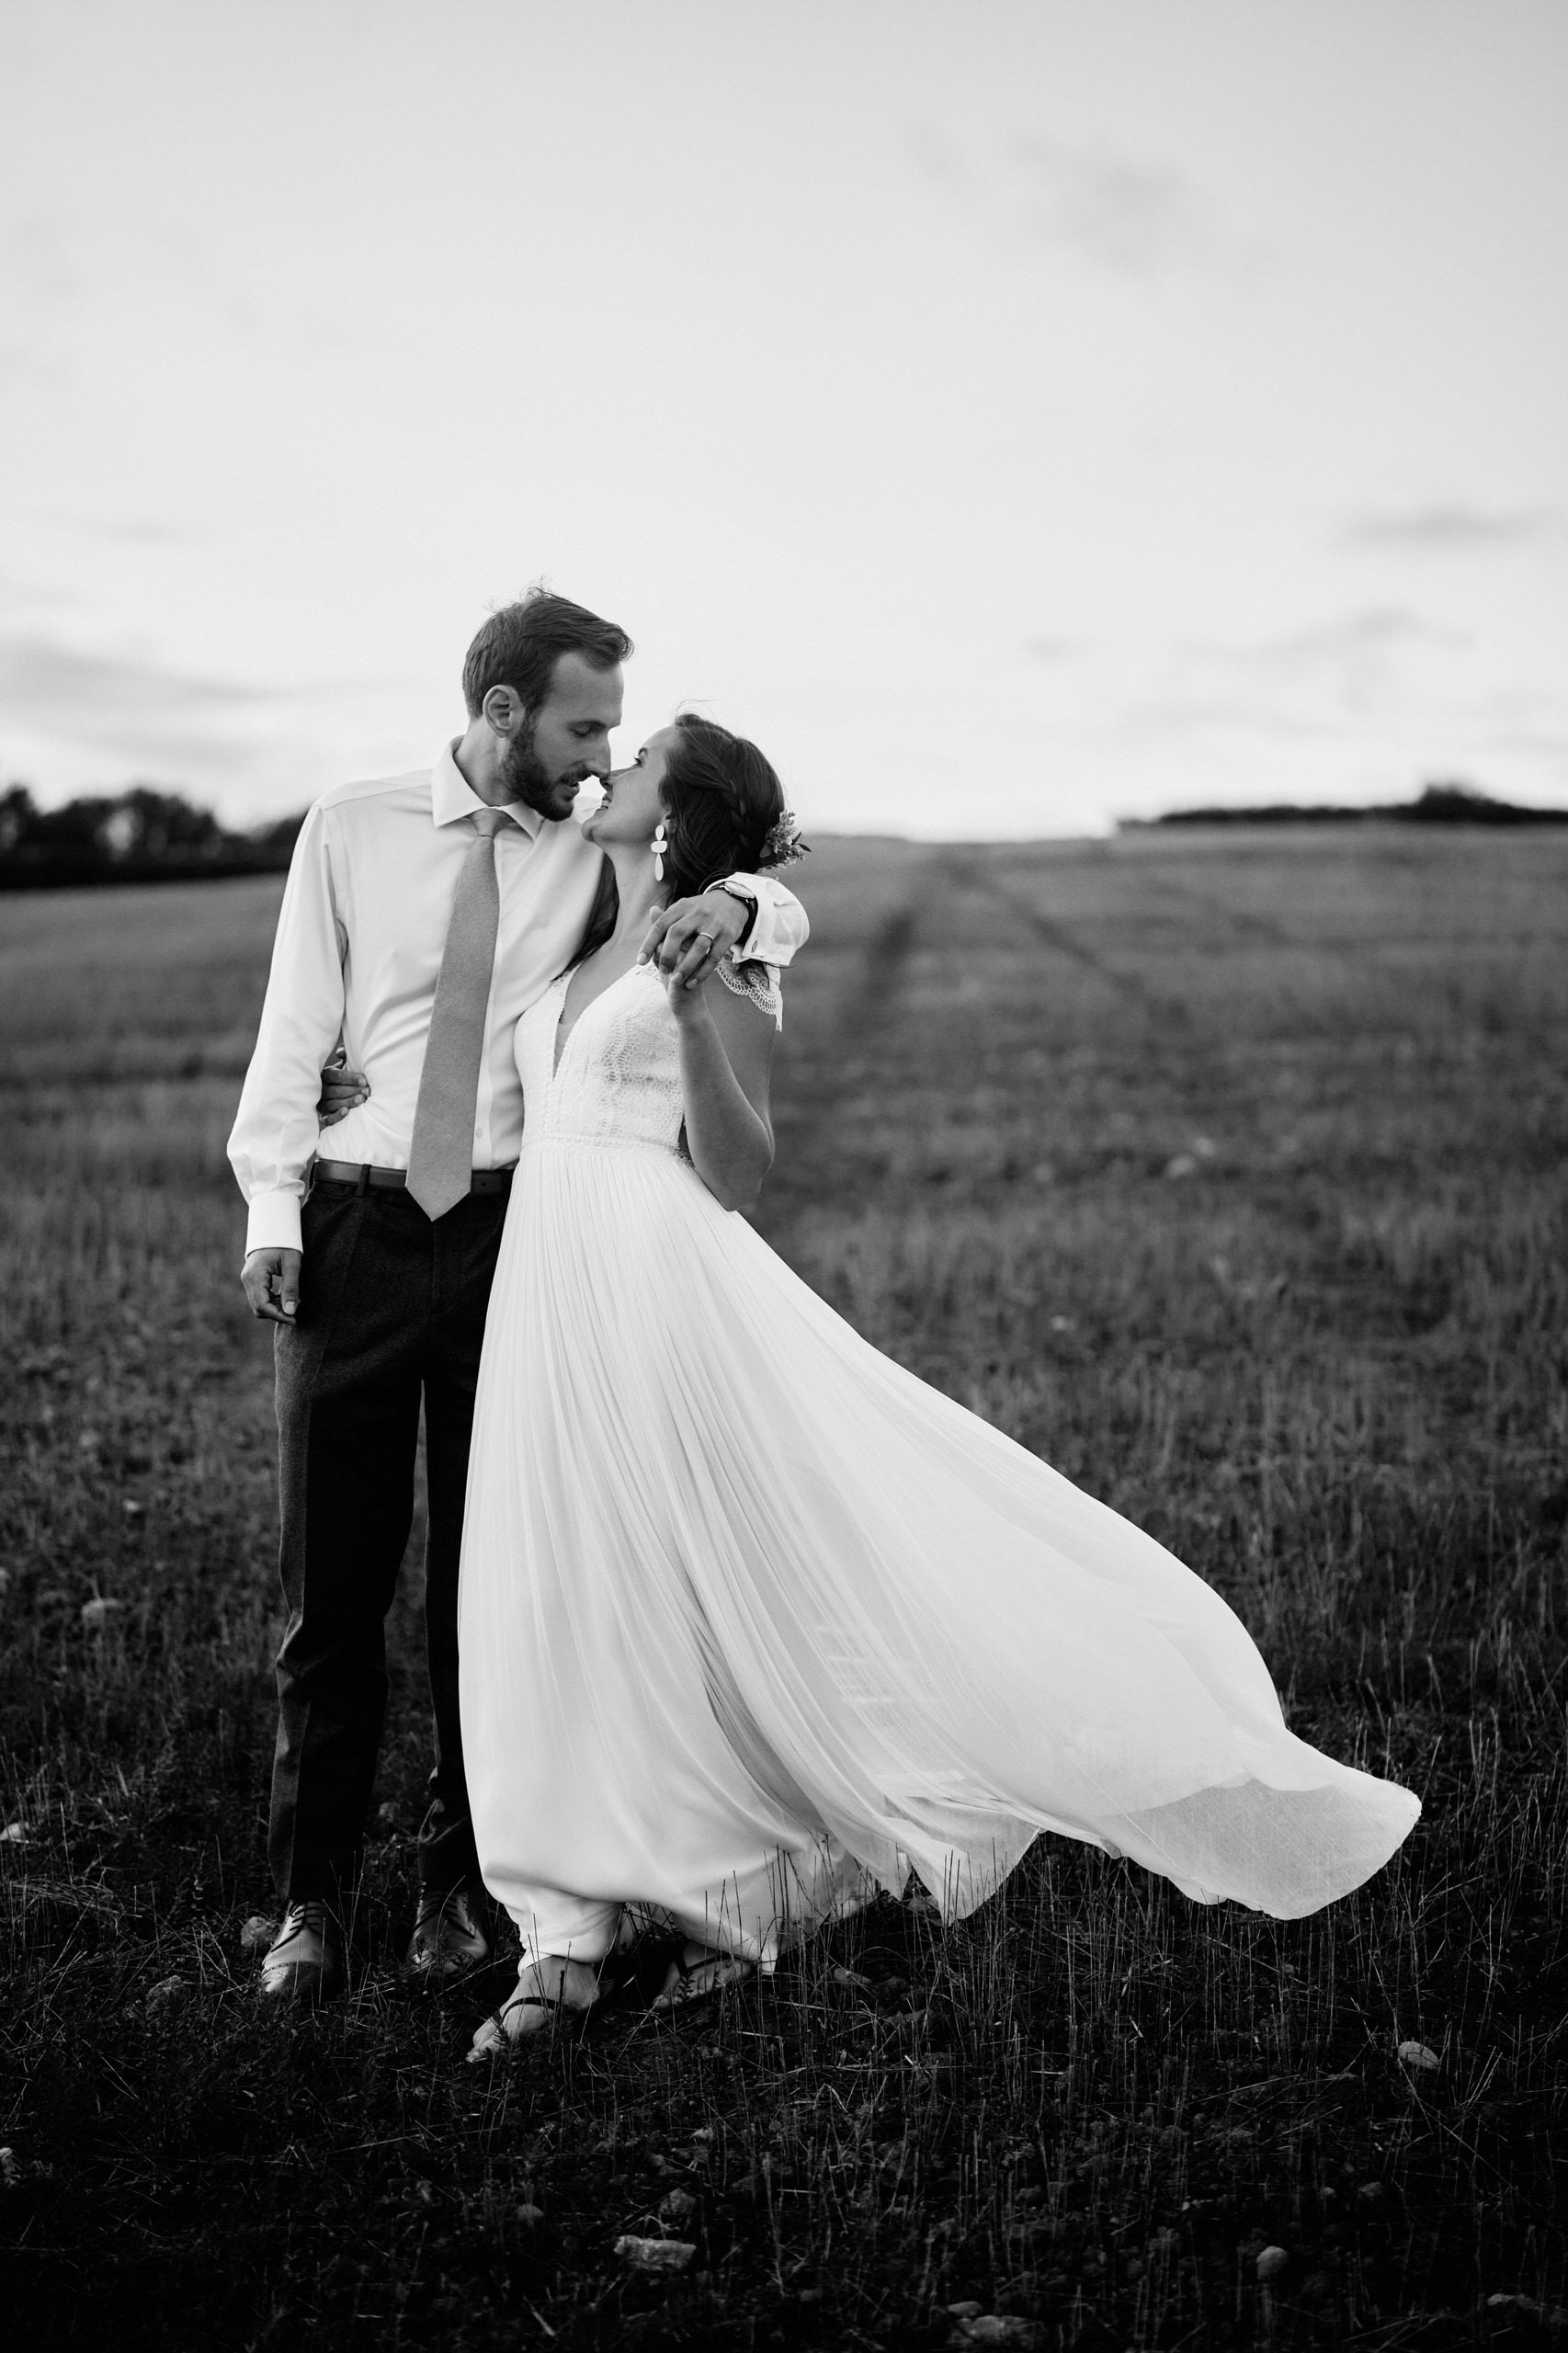 A couple getting married are kissing in a field.